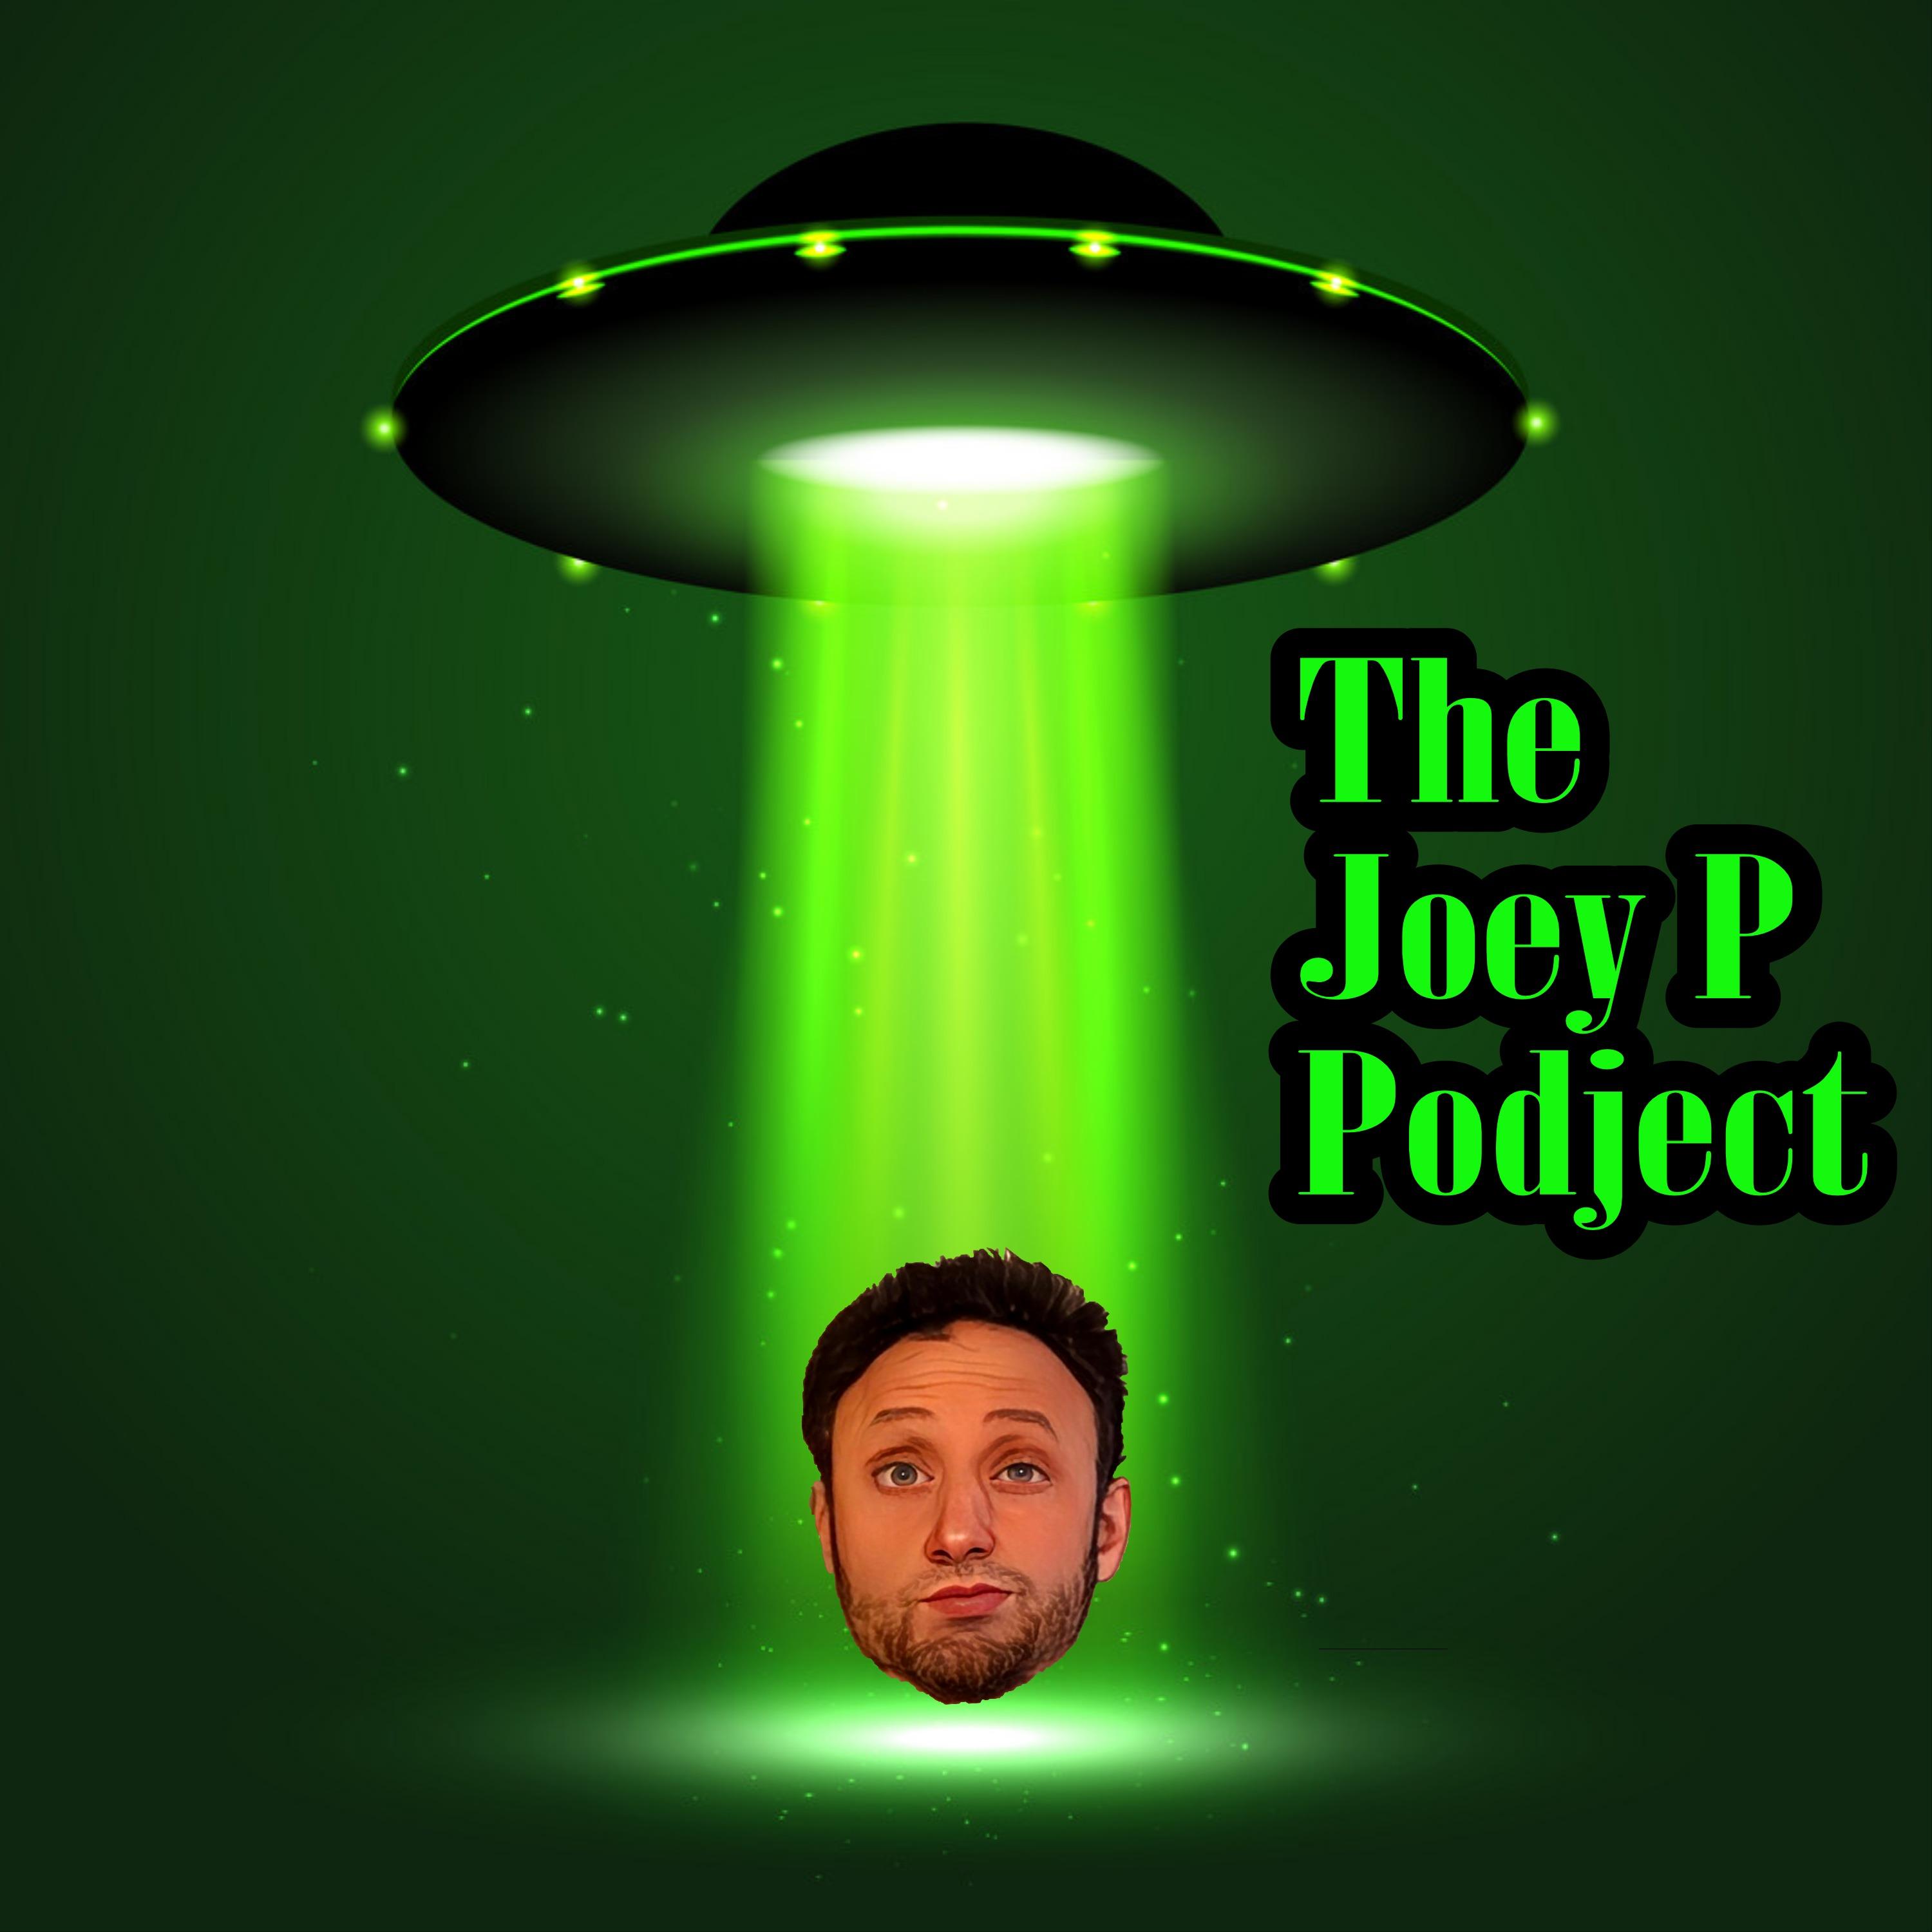 The Joey P Podject